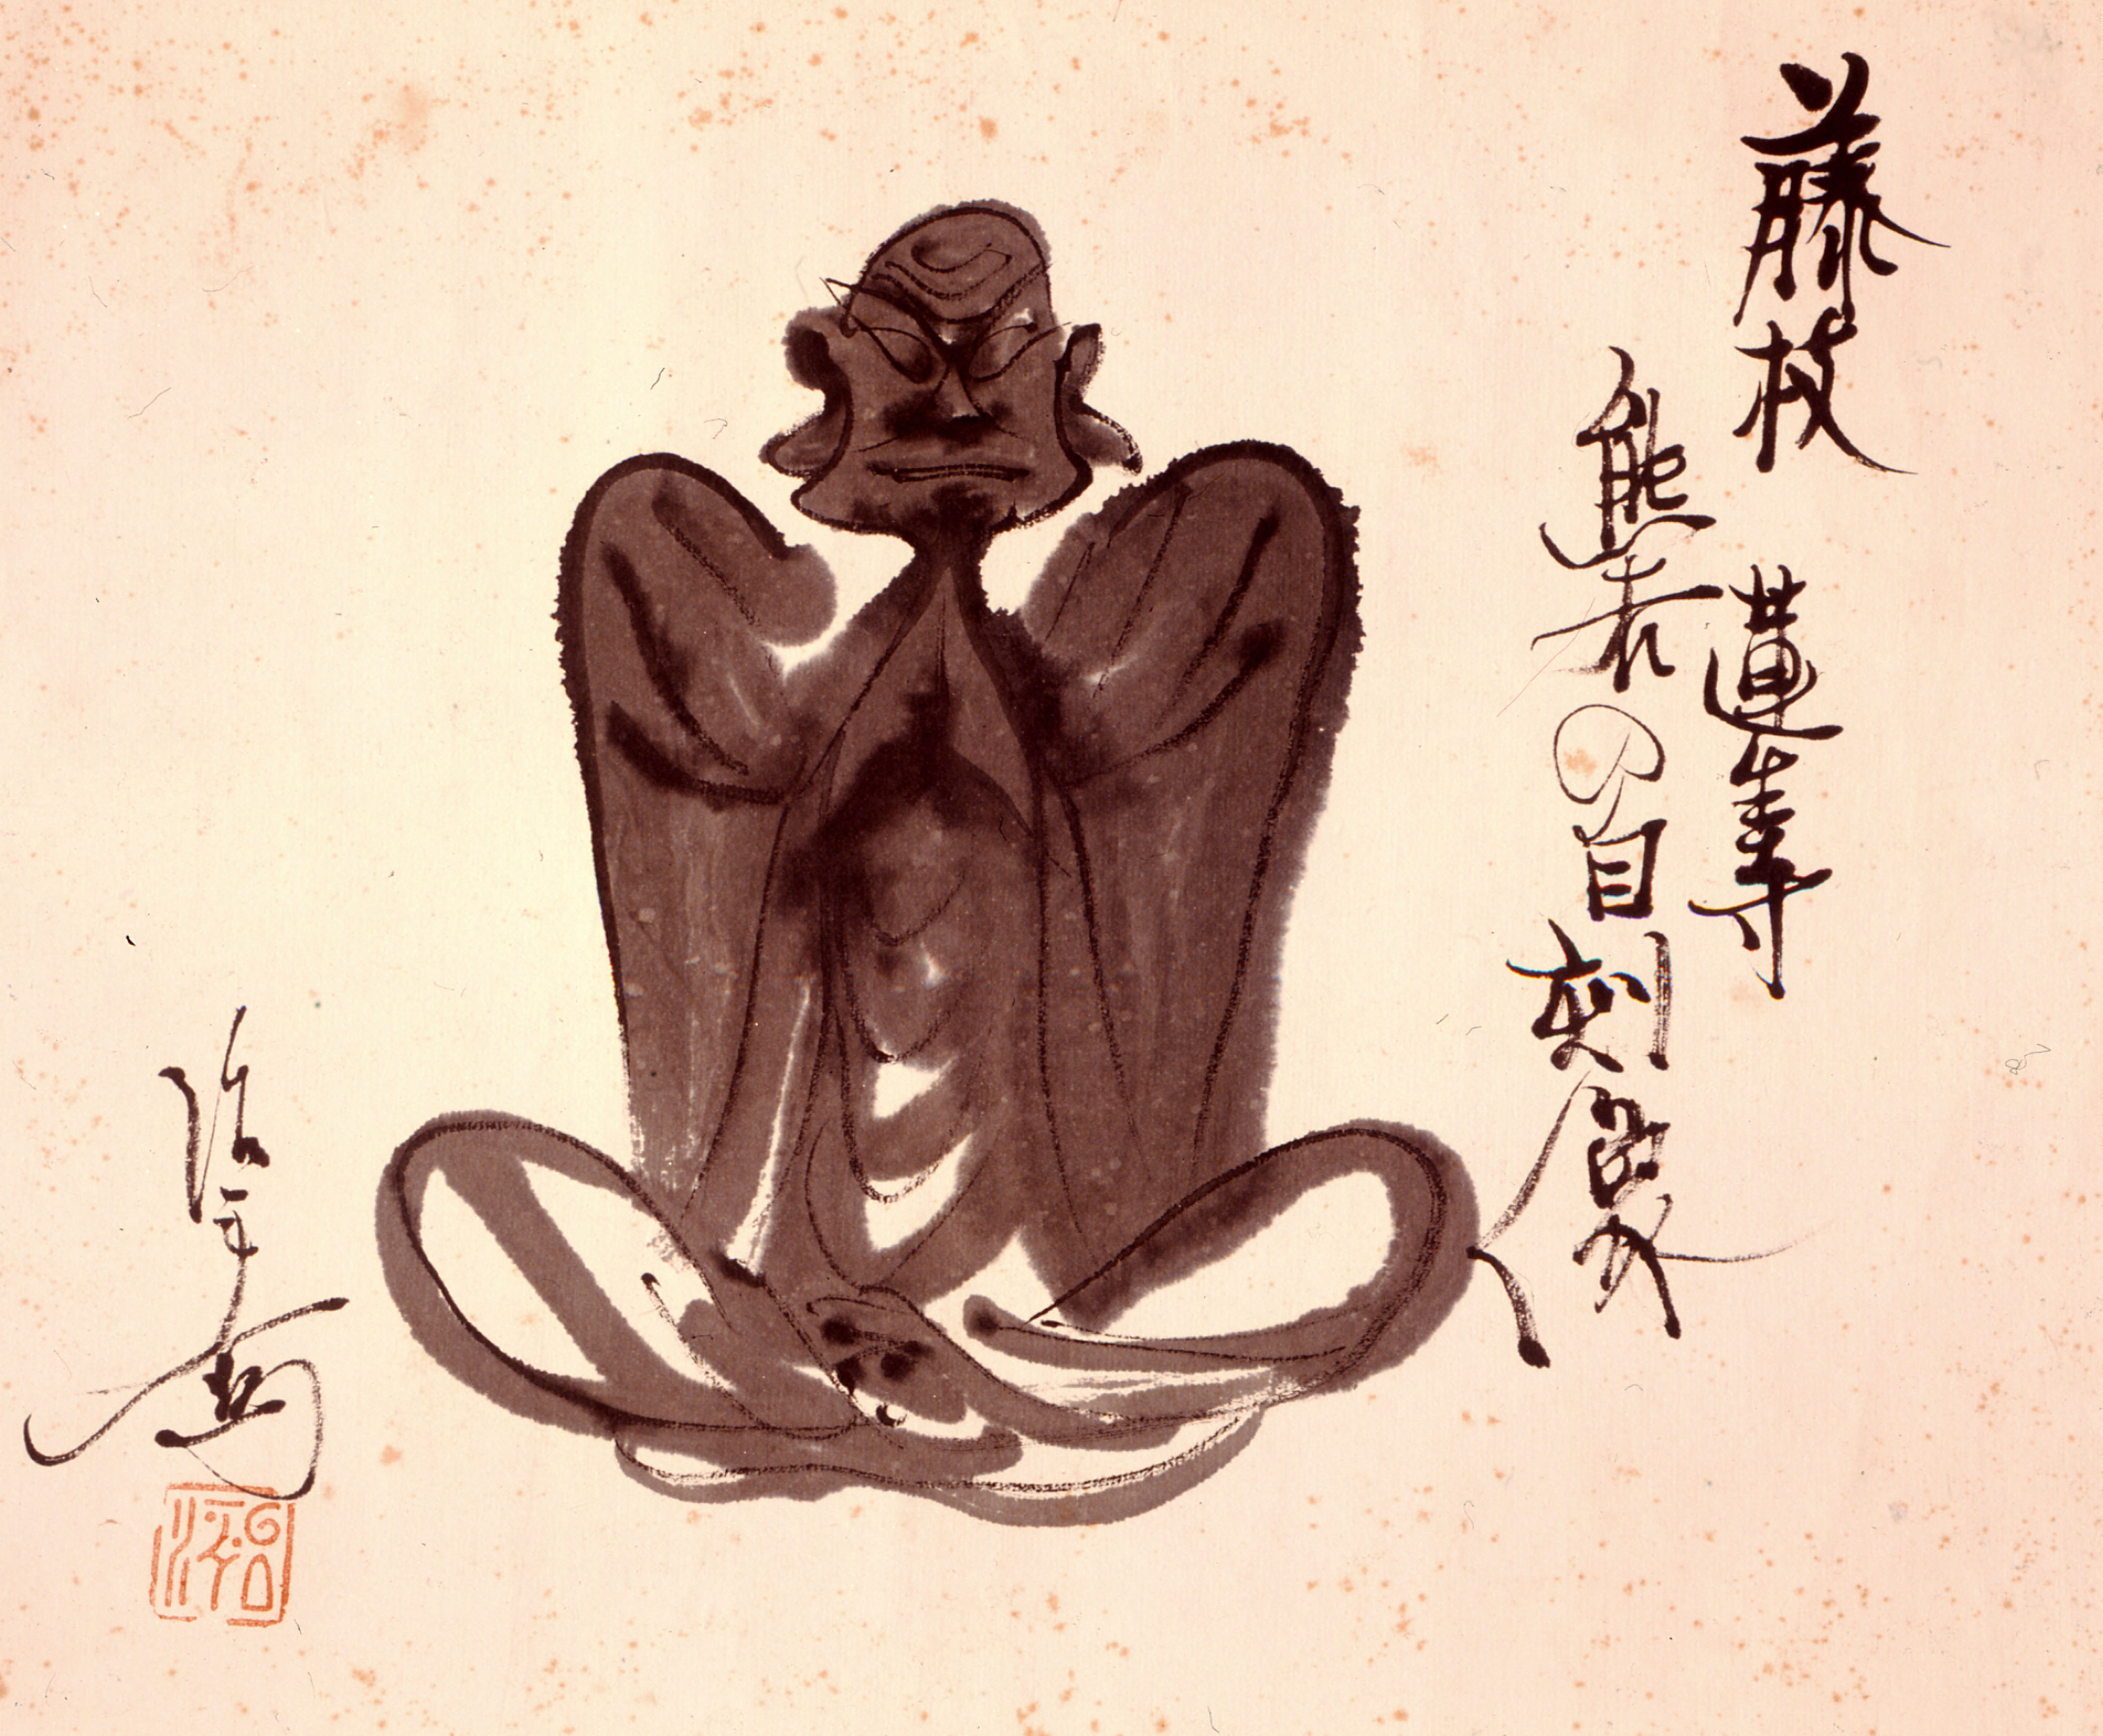 Depiction of a Kappa, a type of vampire like lecherous creature of Japanese folklore. (Werner Forman—UIG/Getty Images)